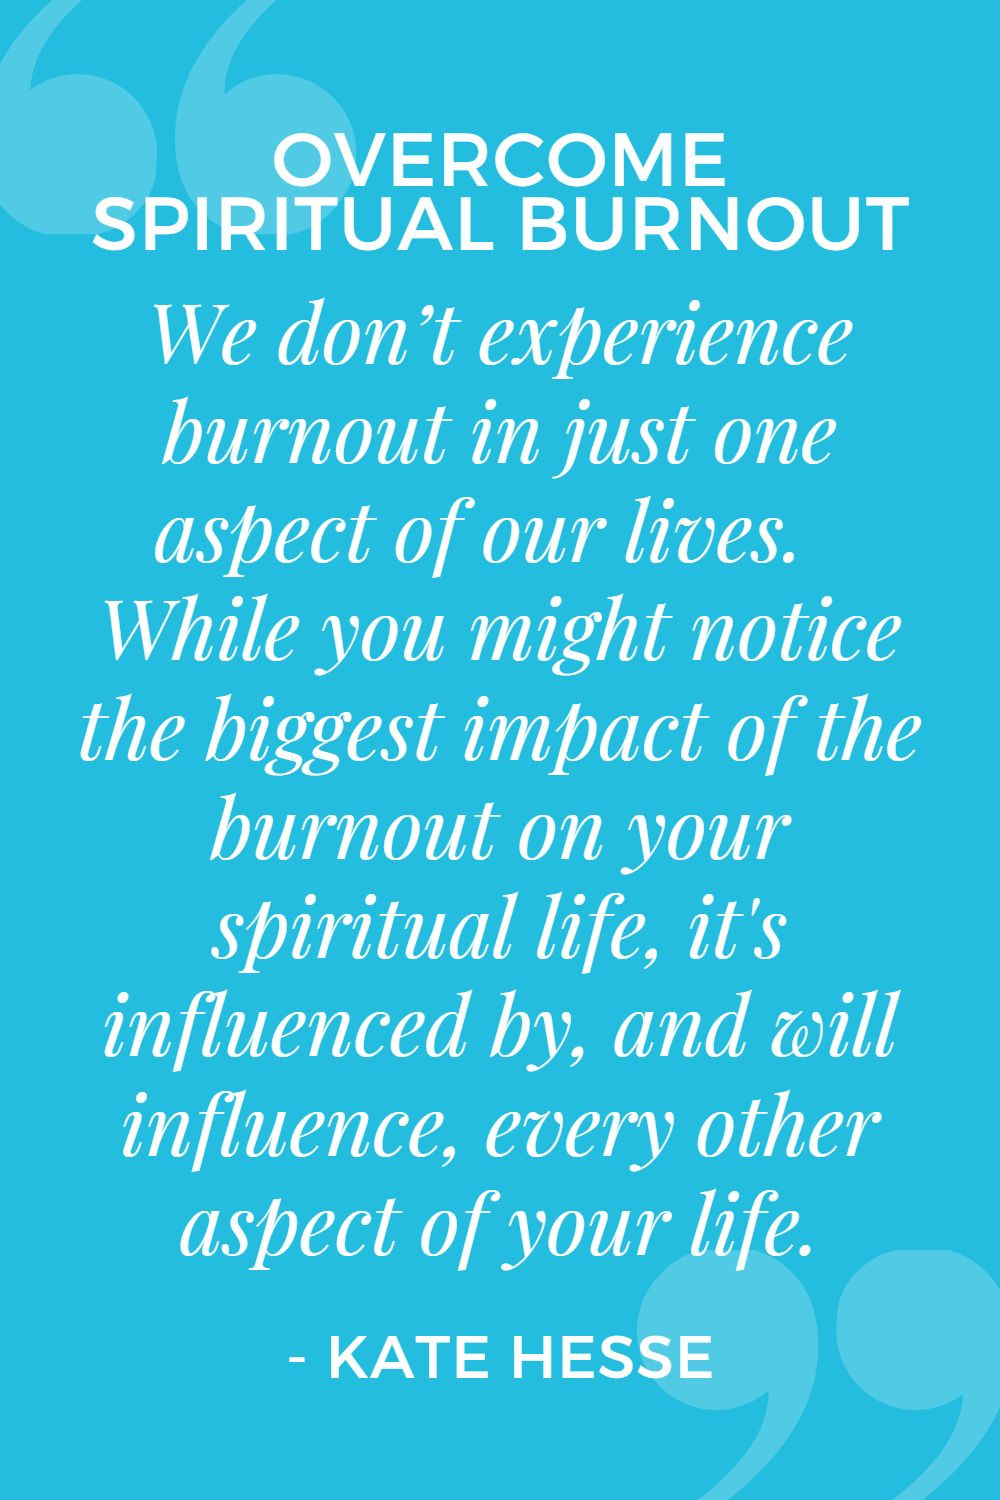 We don't experience burnout in just one aspect of our lives. While you might notice the biggest impact of the burnout on your spiritual life, it's influenced by, and will influence, every other aspect of your life.